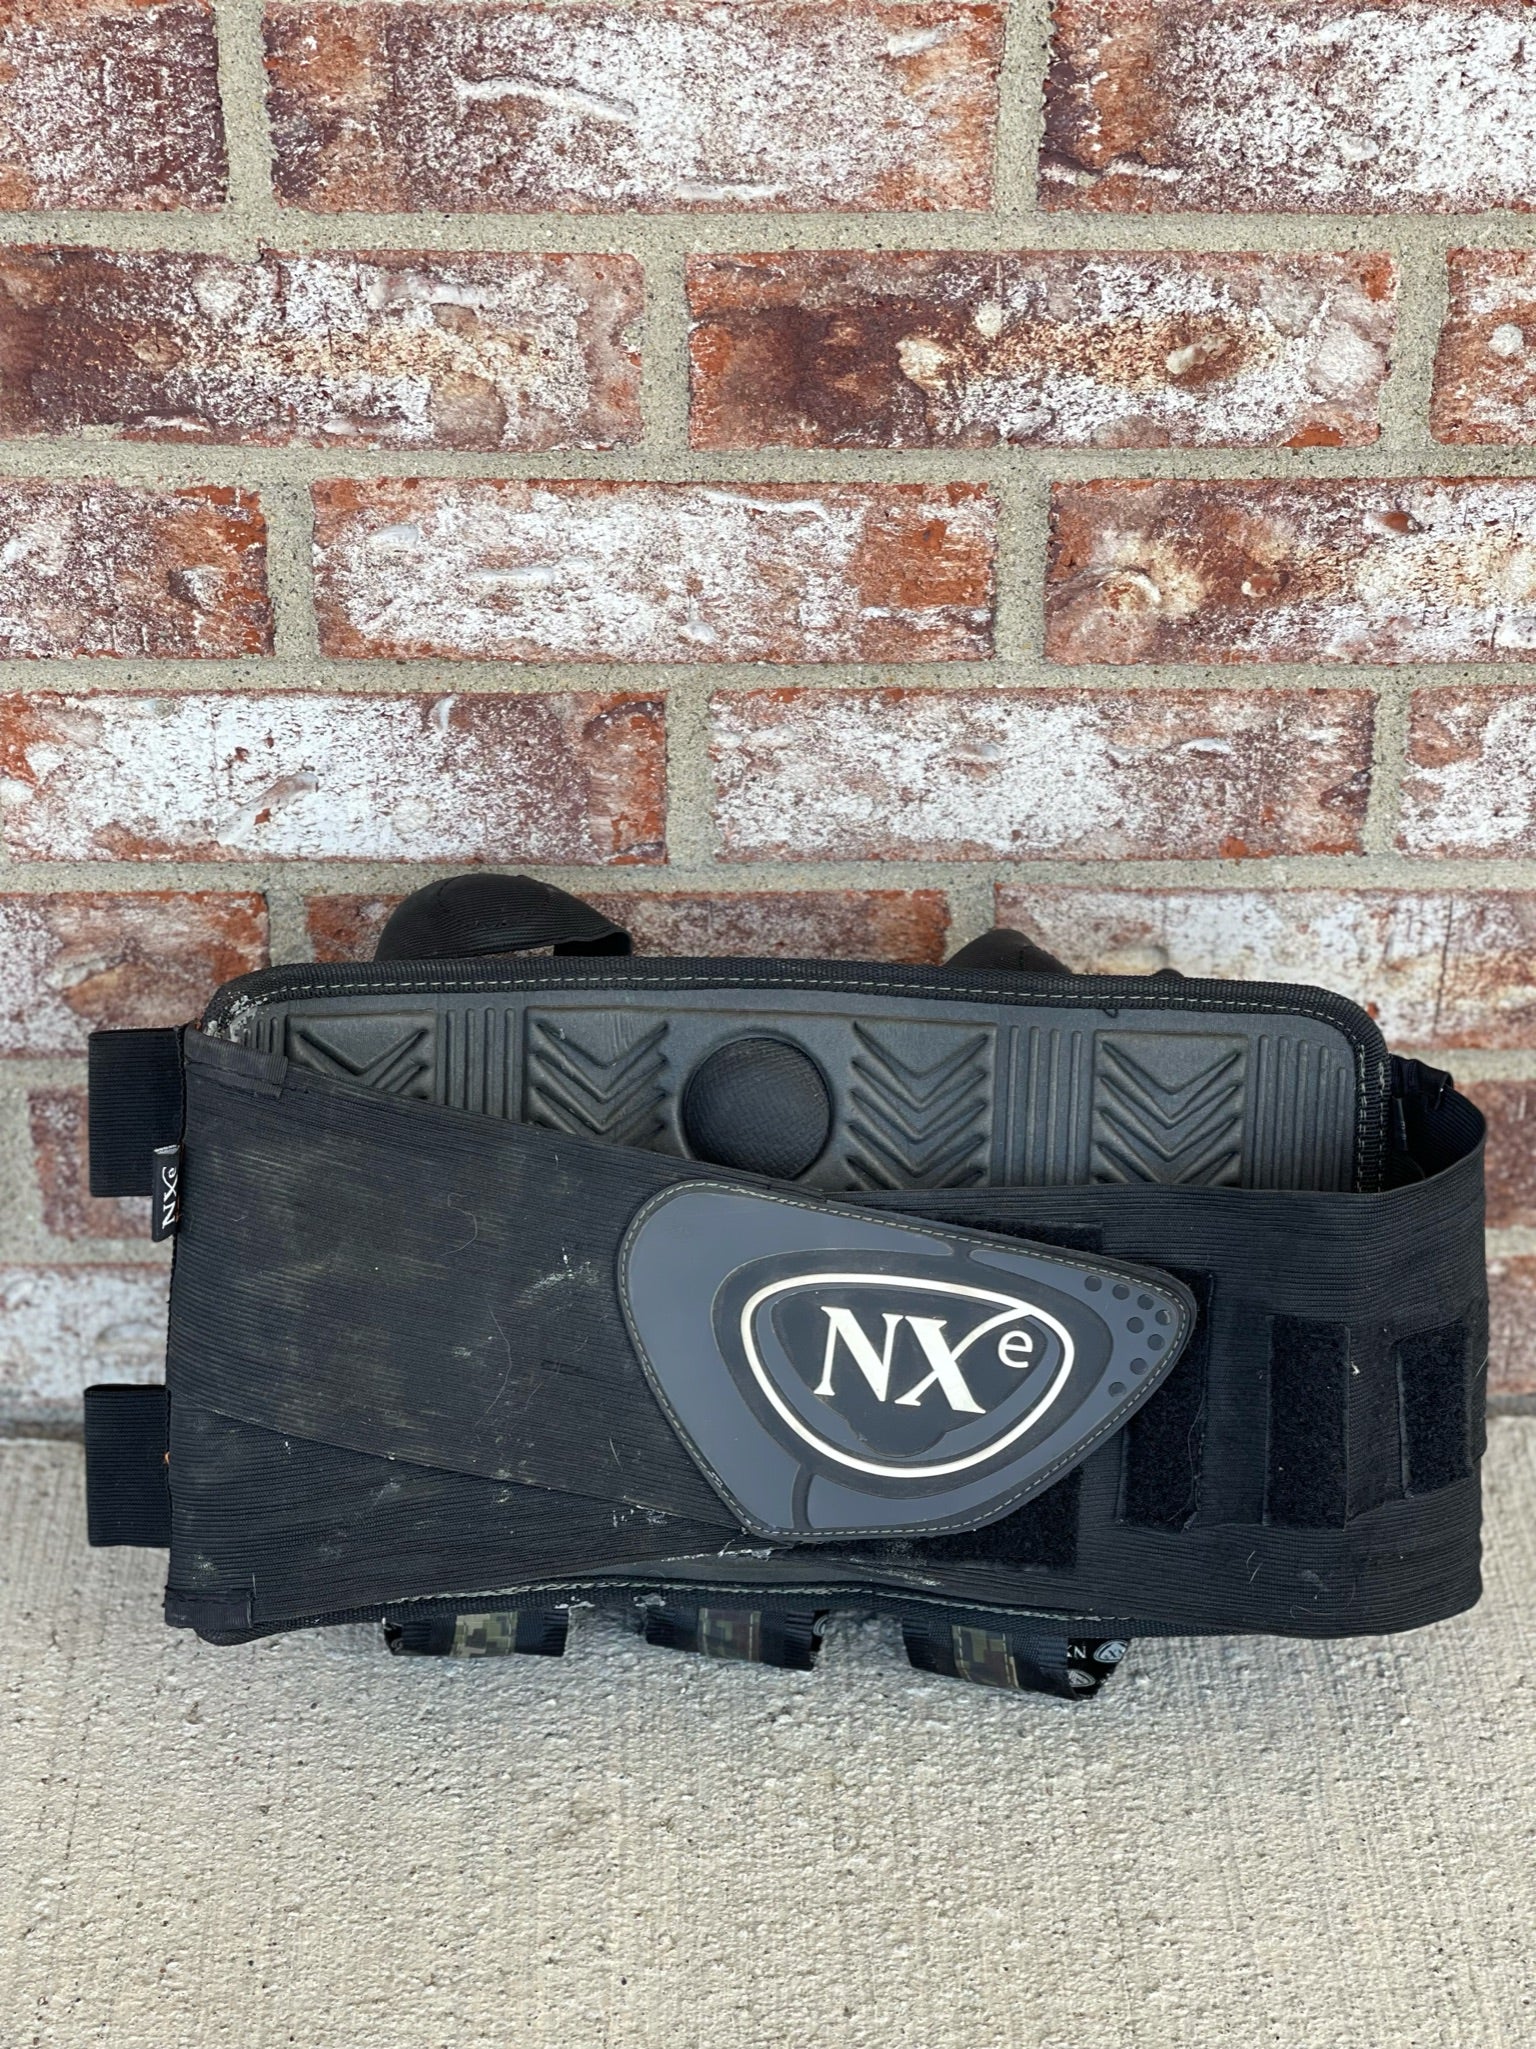 Used NXE 3+4 Pod Pack - Camo